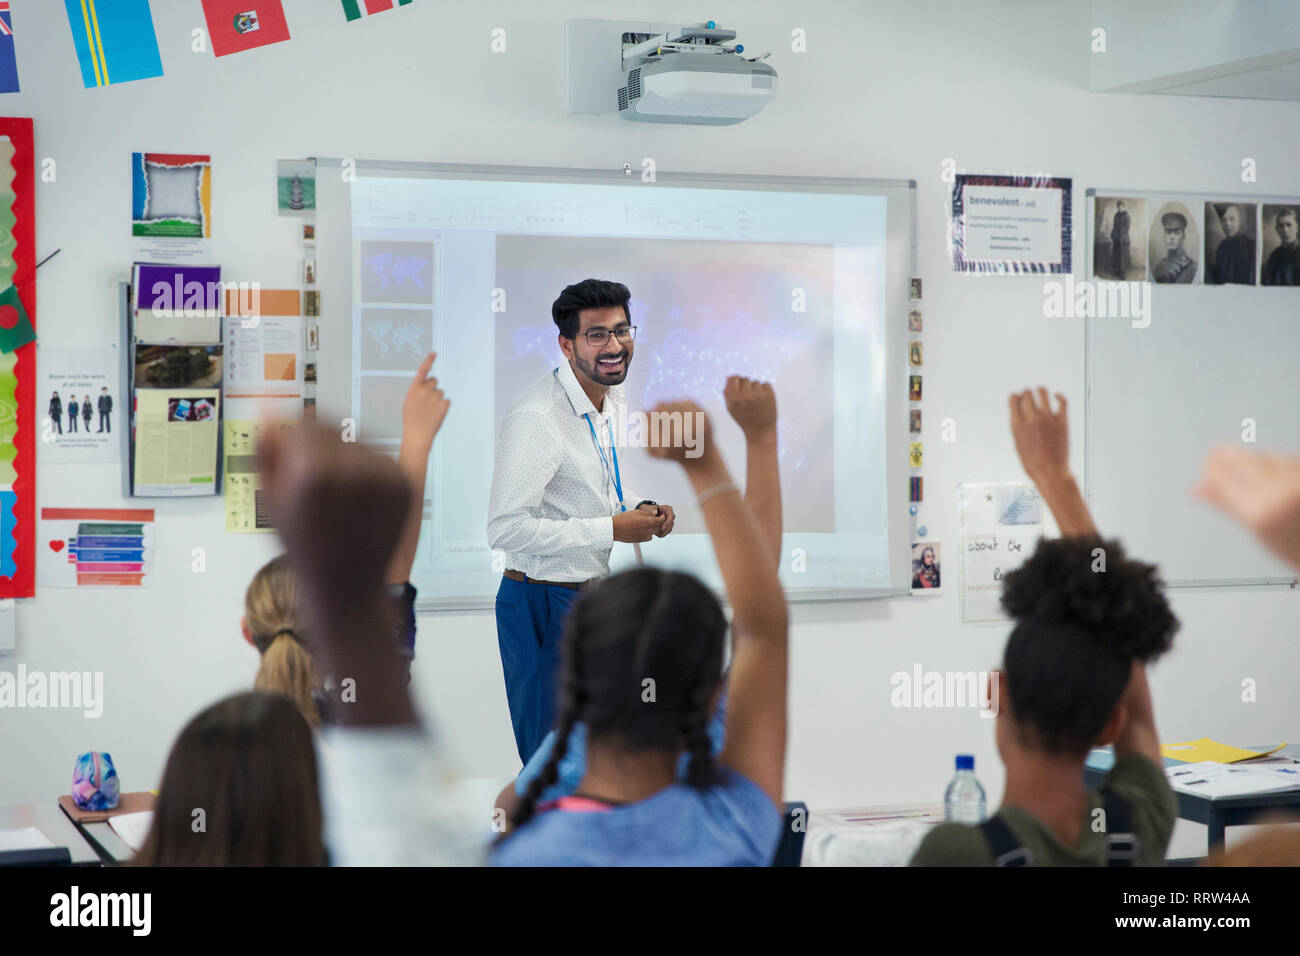 Smiling male teacher leading lesson in classroom Stock Photo